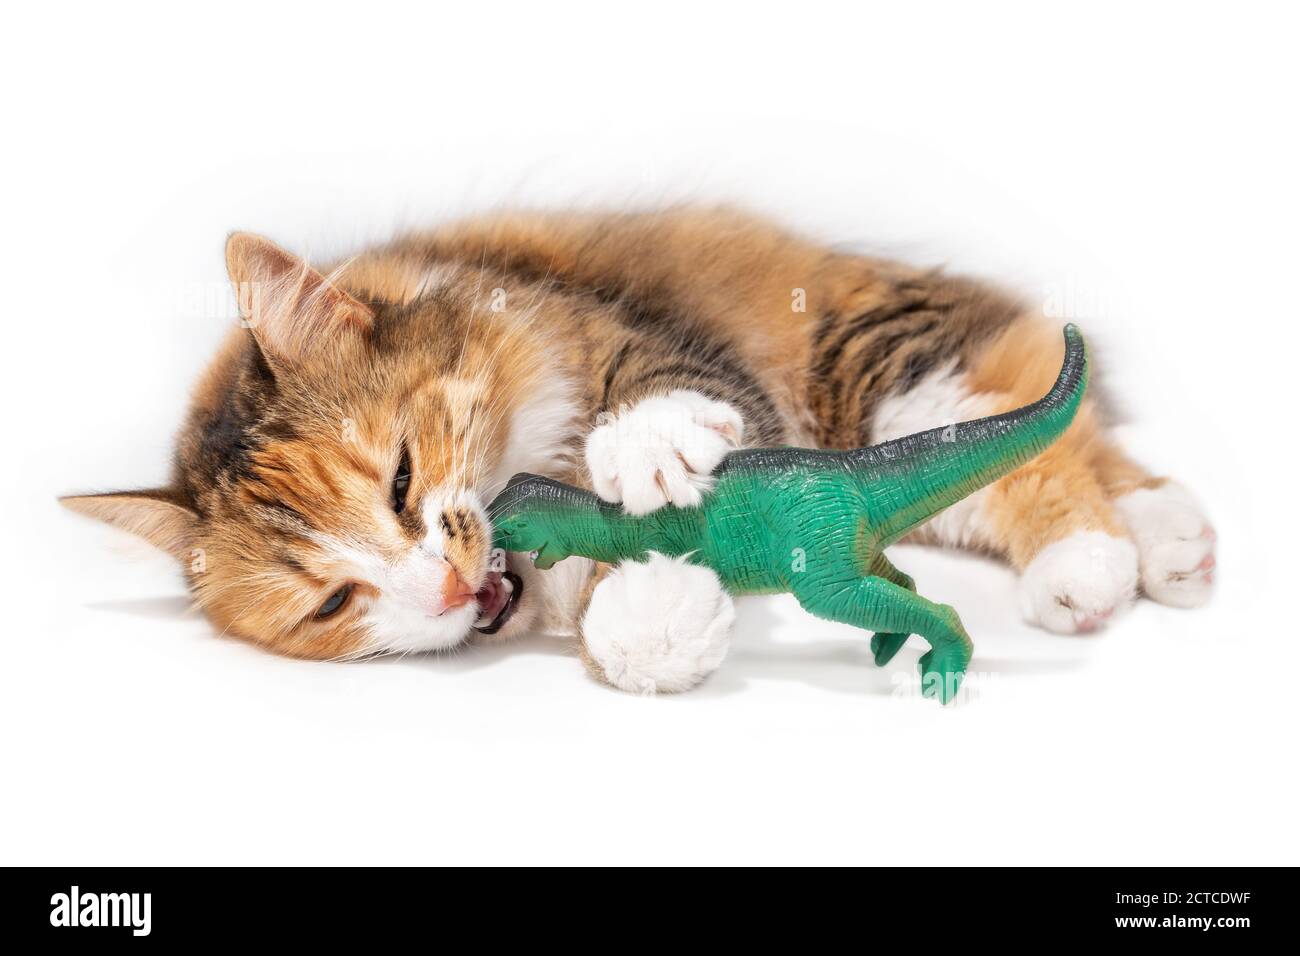 Cat vs dinosaur. A orange white long hair fluffy kitty is laying sideways with a large green plastic kid toy in the mouth. Stock Photo